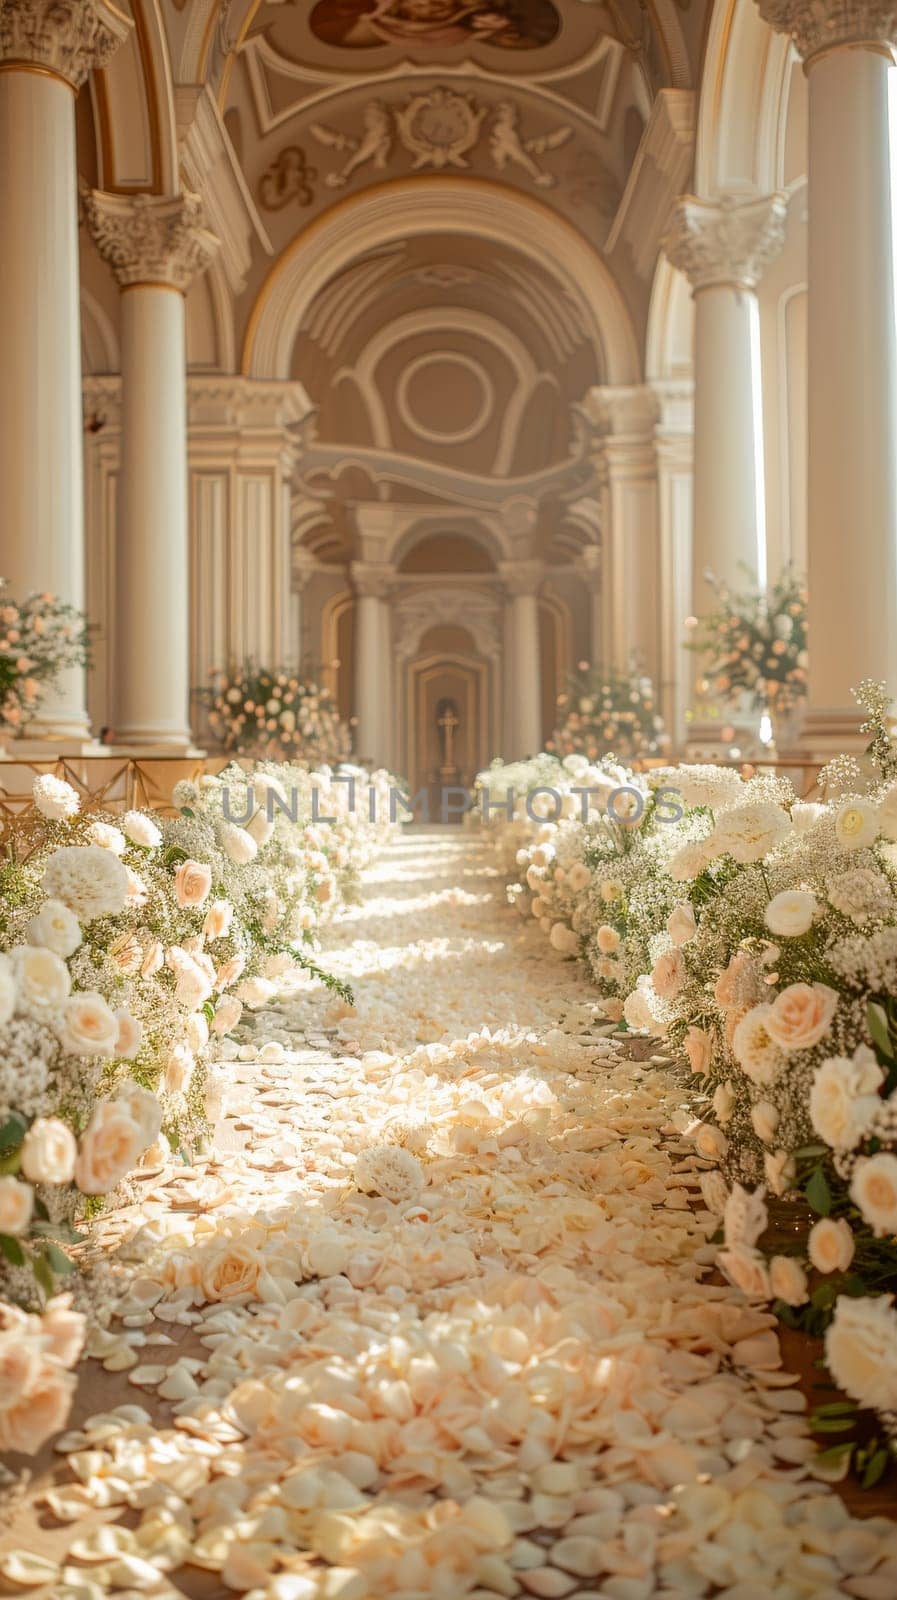 A long, narrow room with white flowers and white petals on the floor. The flowers are arranged in a way that they look like they are falling from the ceiling. The room has a very elegant